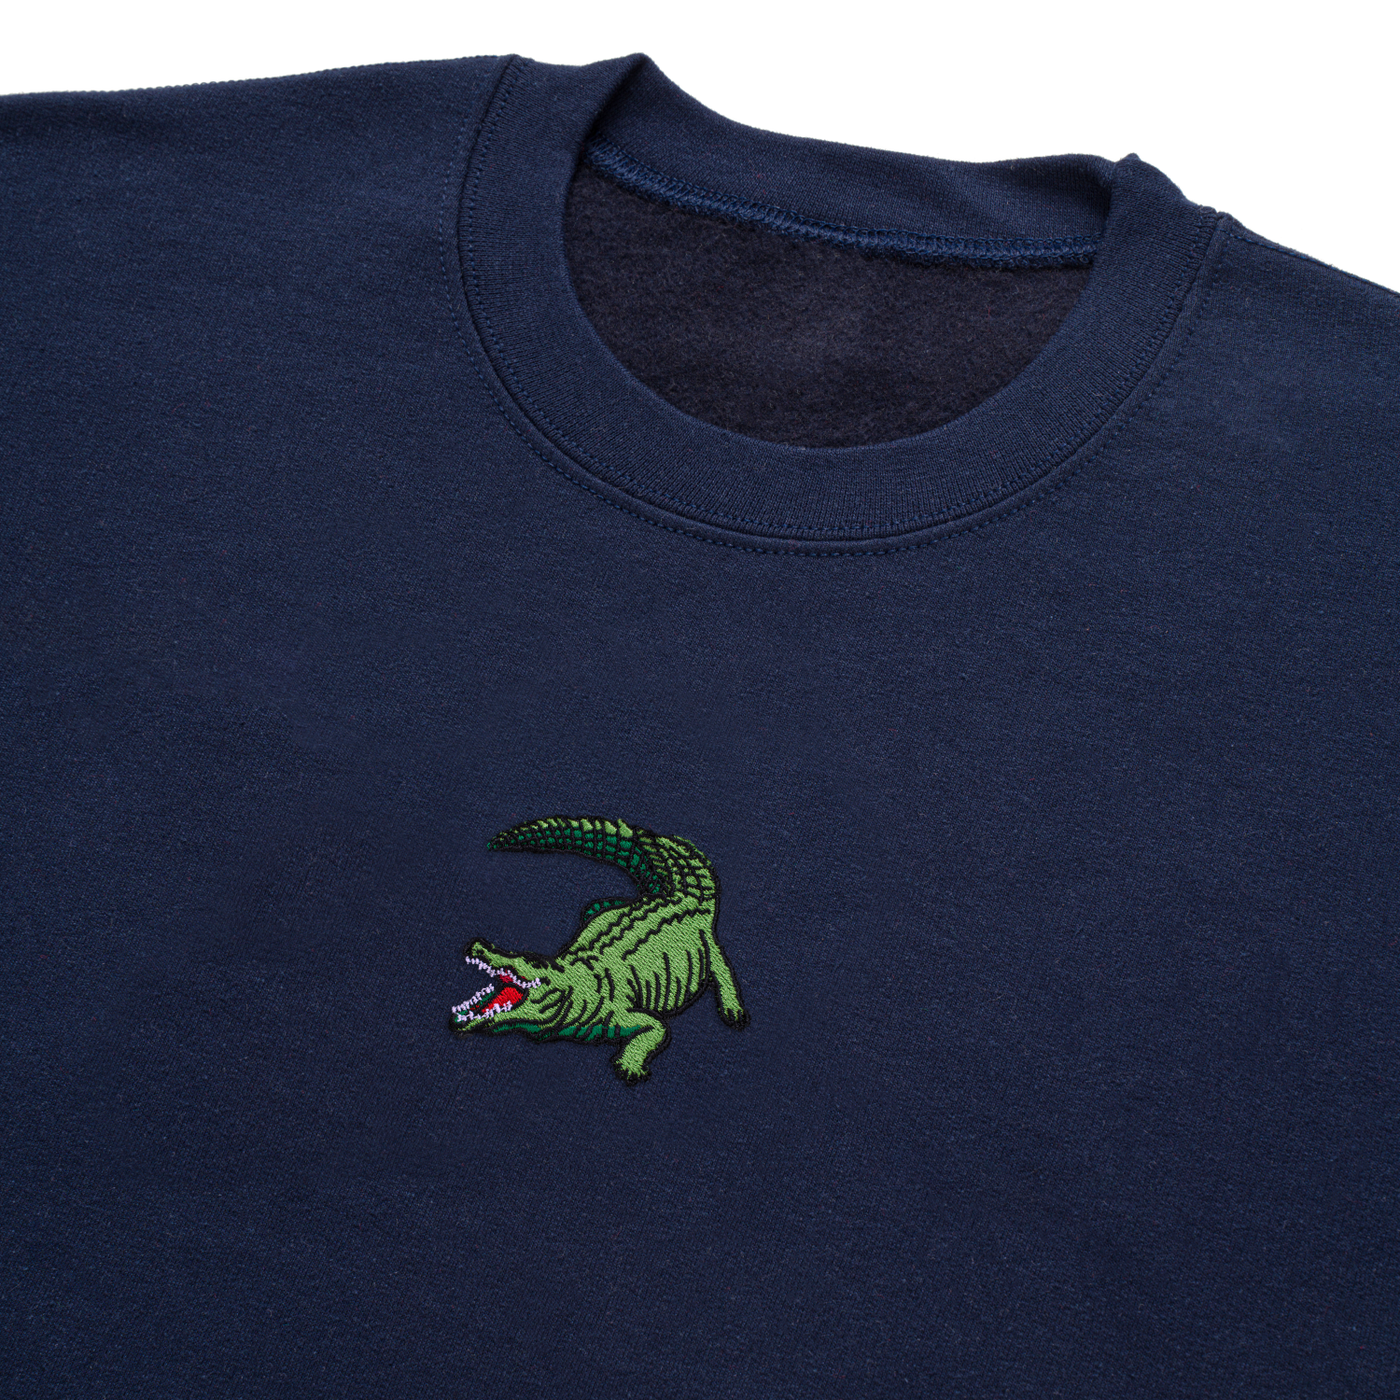 Bobby's Planet Men's Embroidered Saltwater Crocodile Sweatshirt from Australia Down Under Animals Collection in Navy Color#color_navy